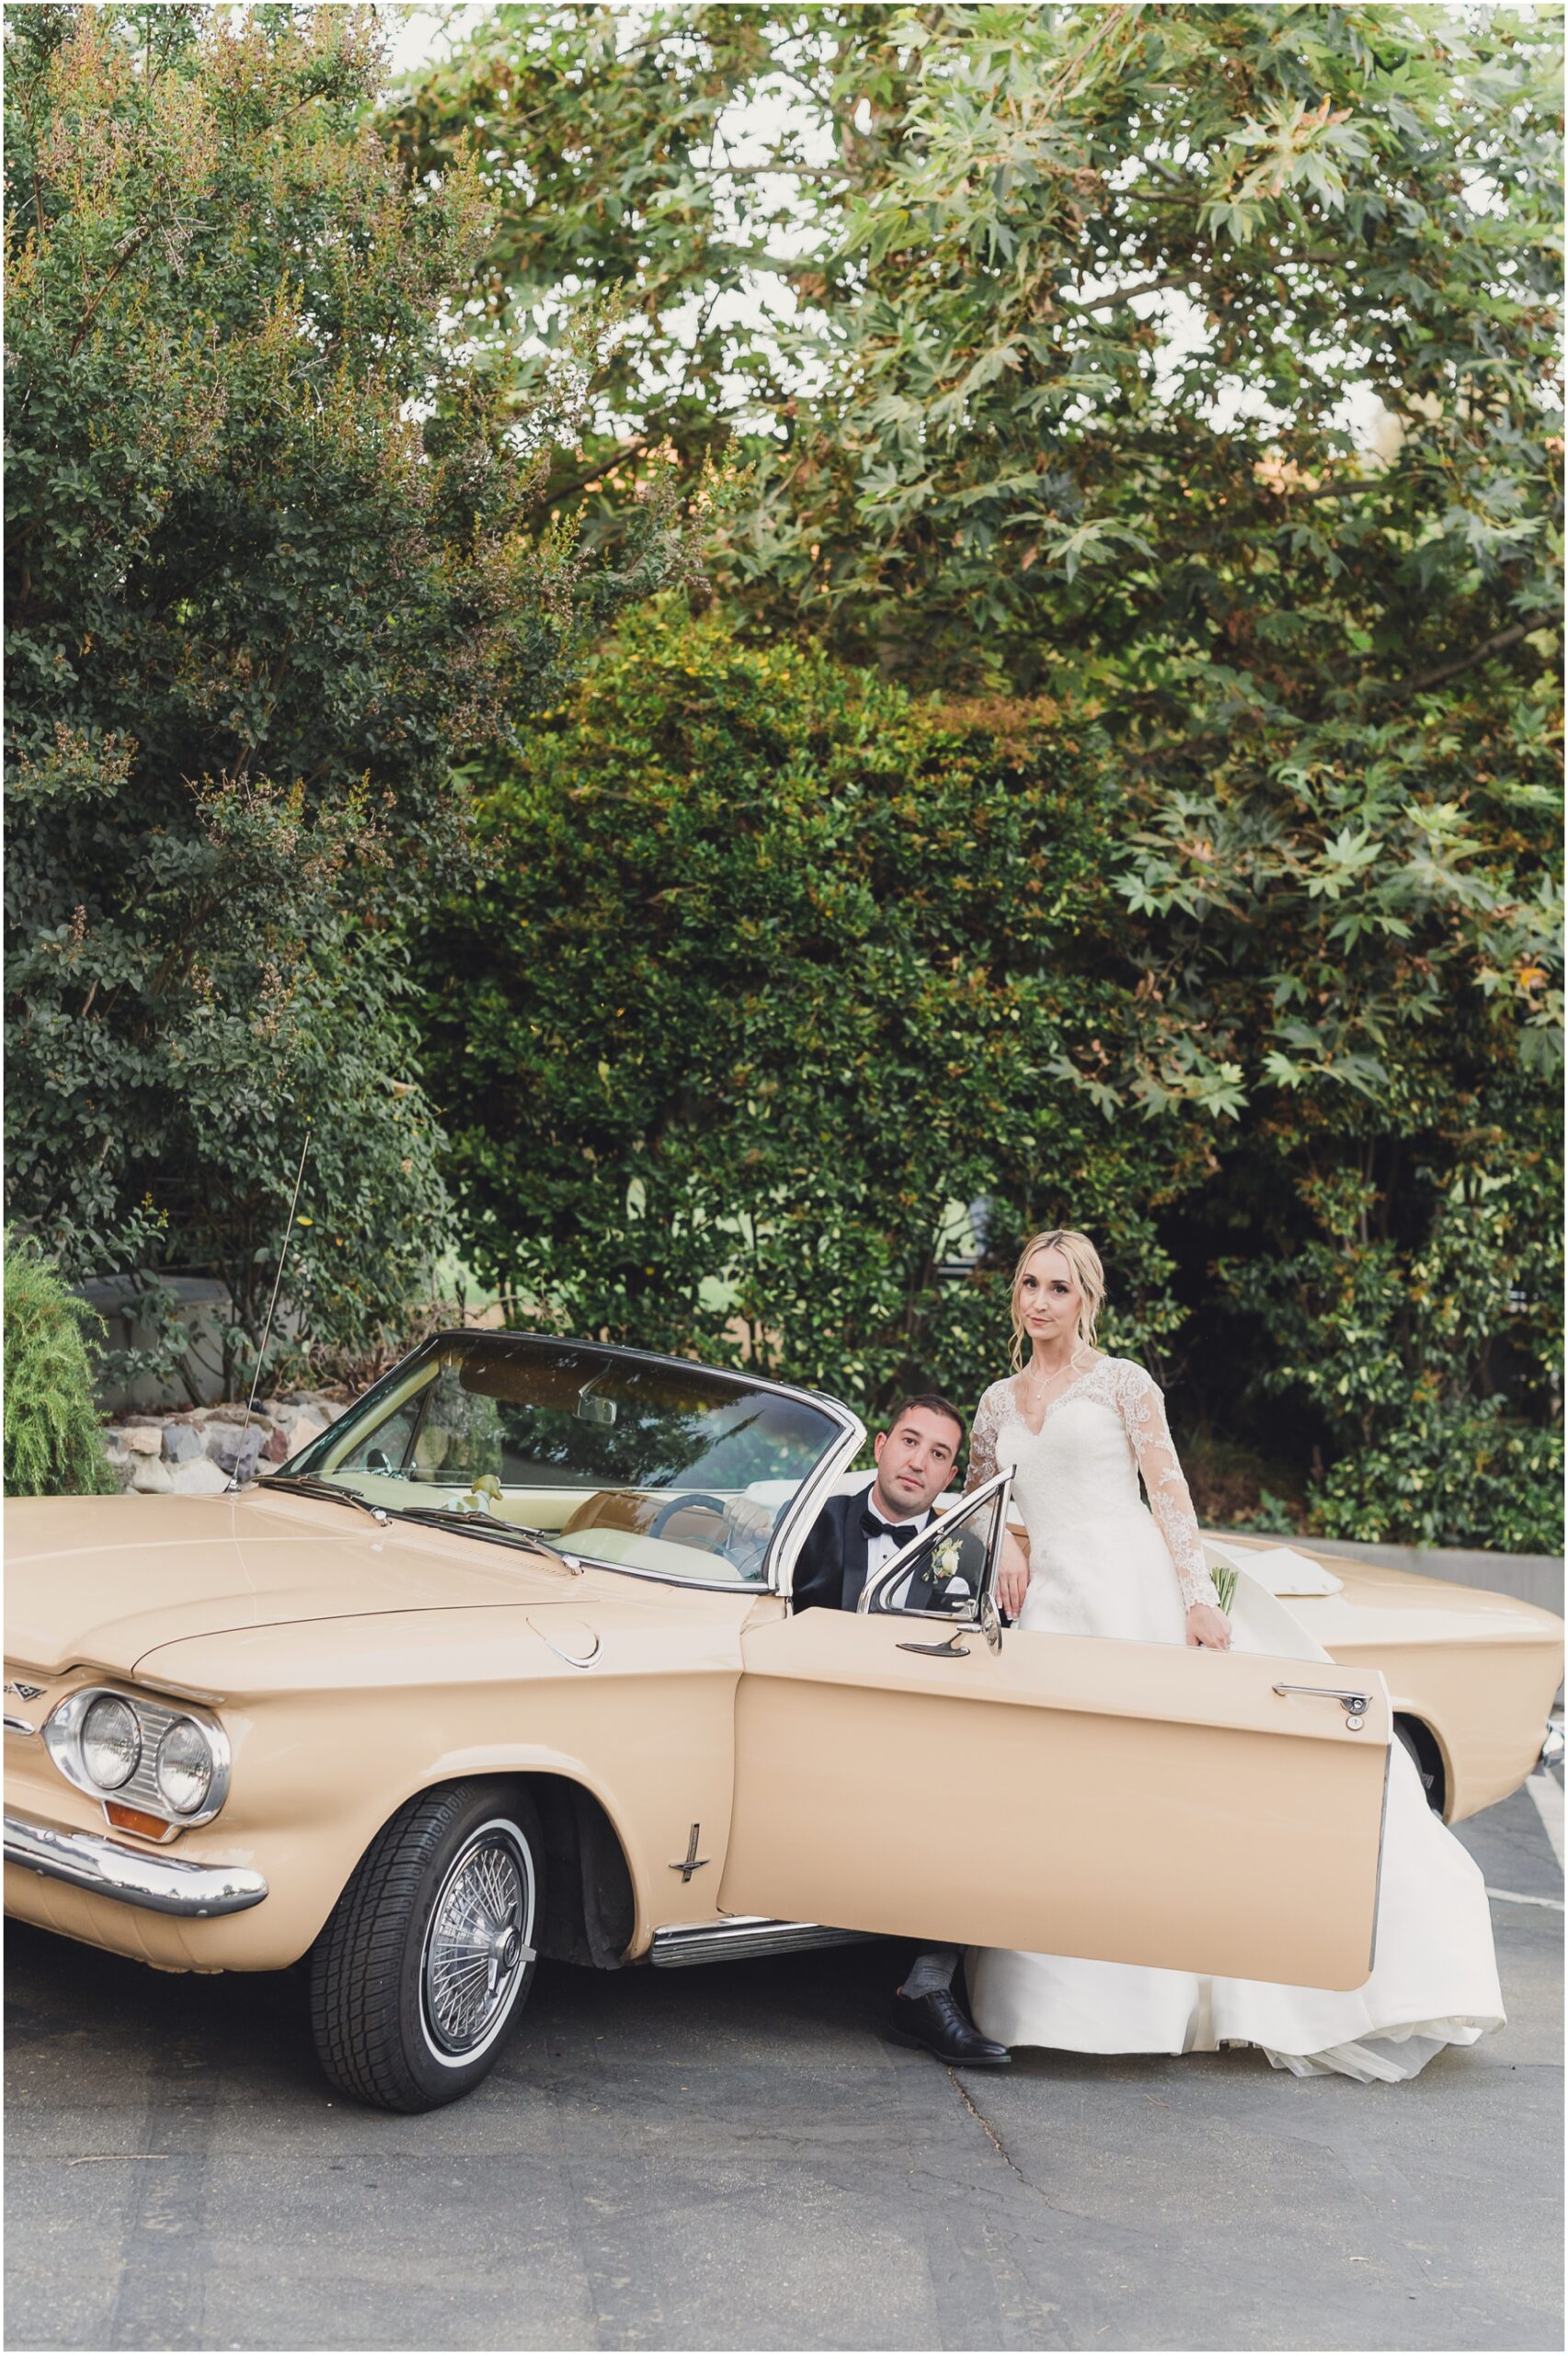 A groom sits in a classic car as his bride leans near to him